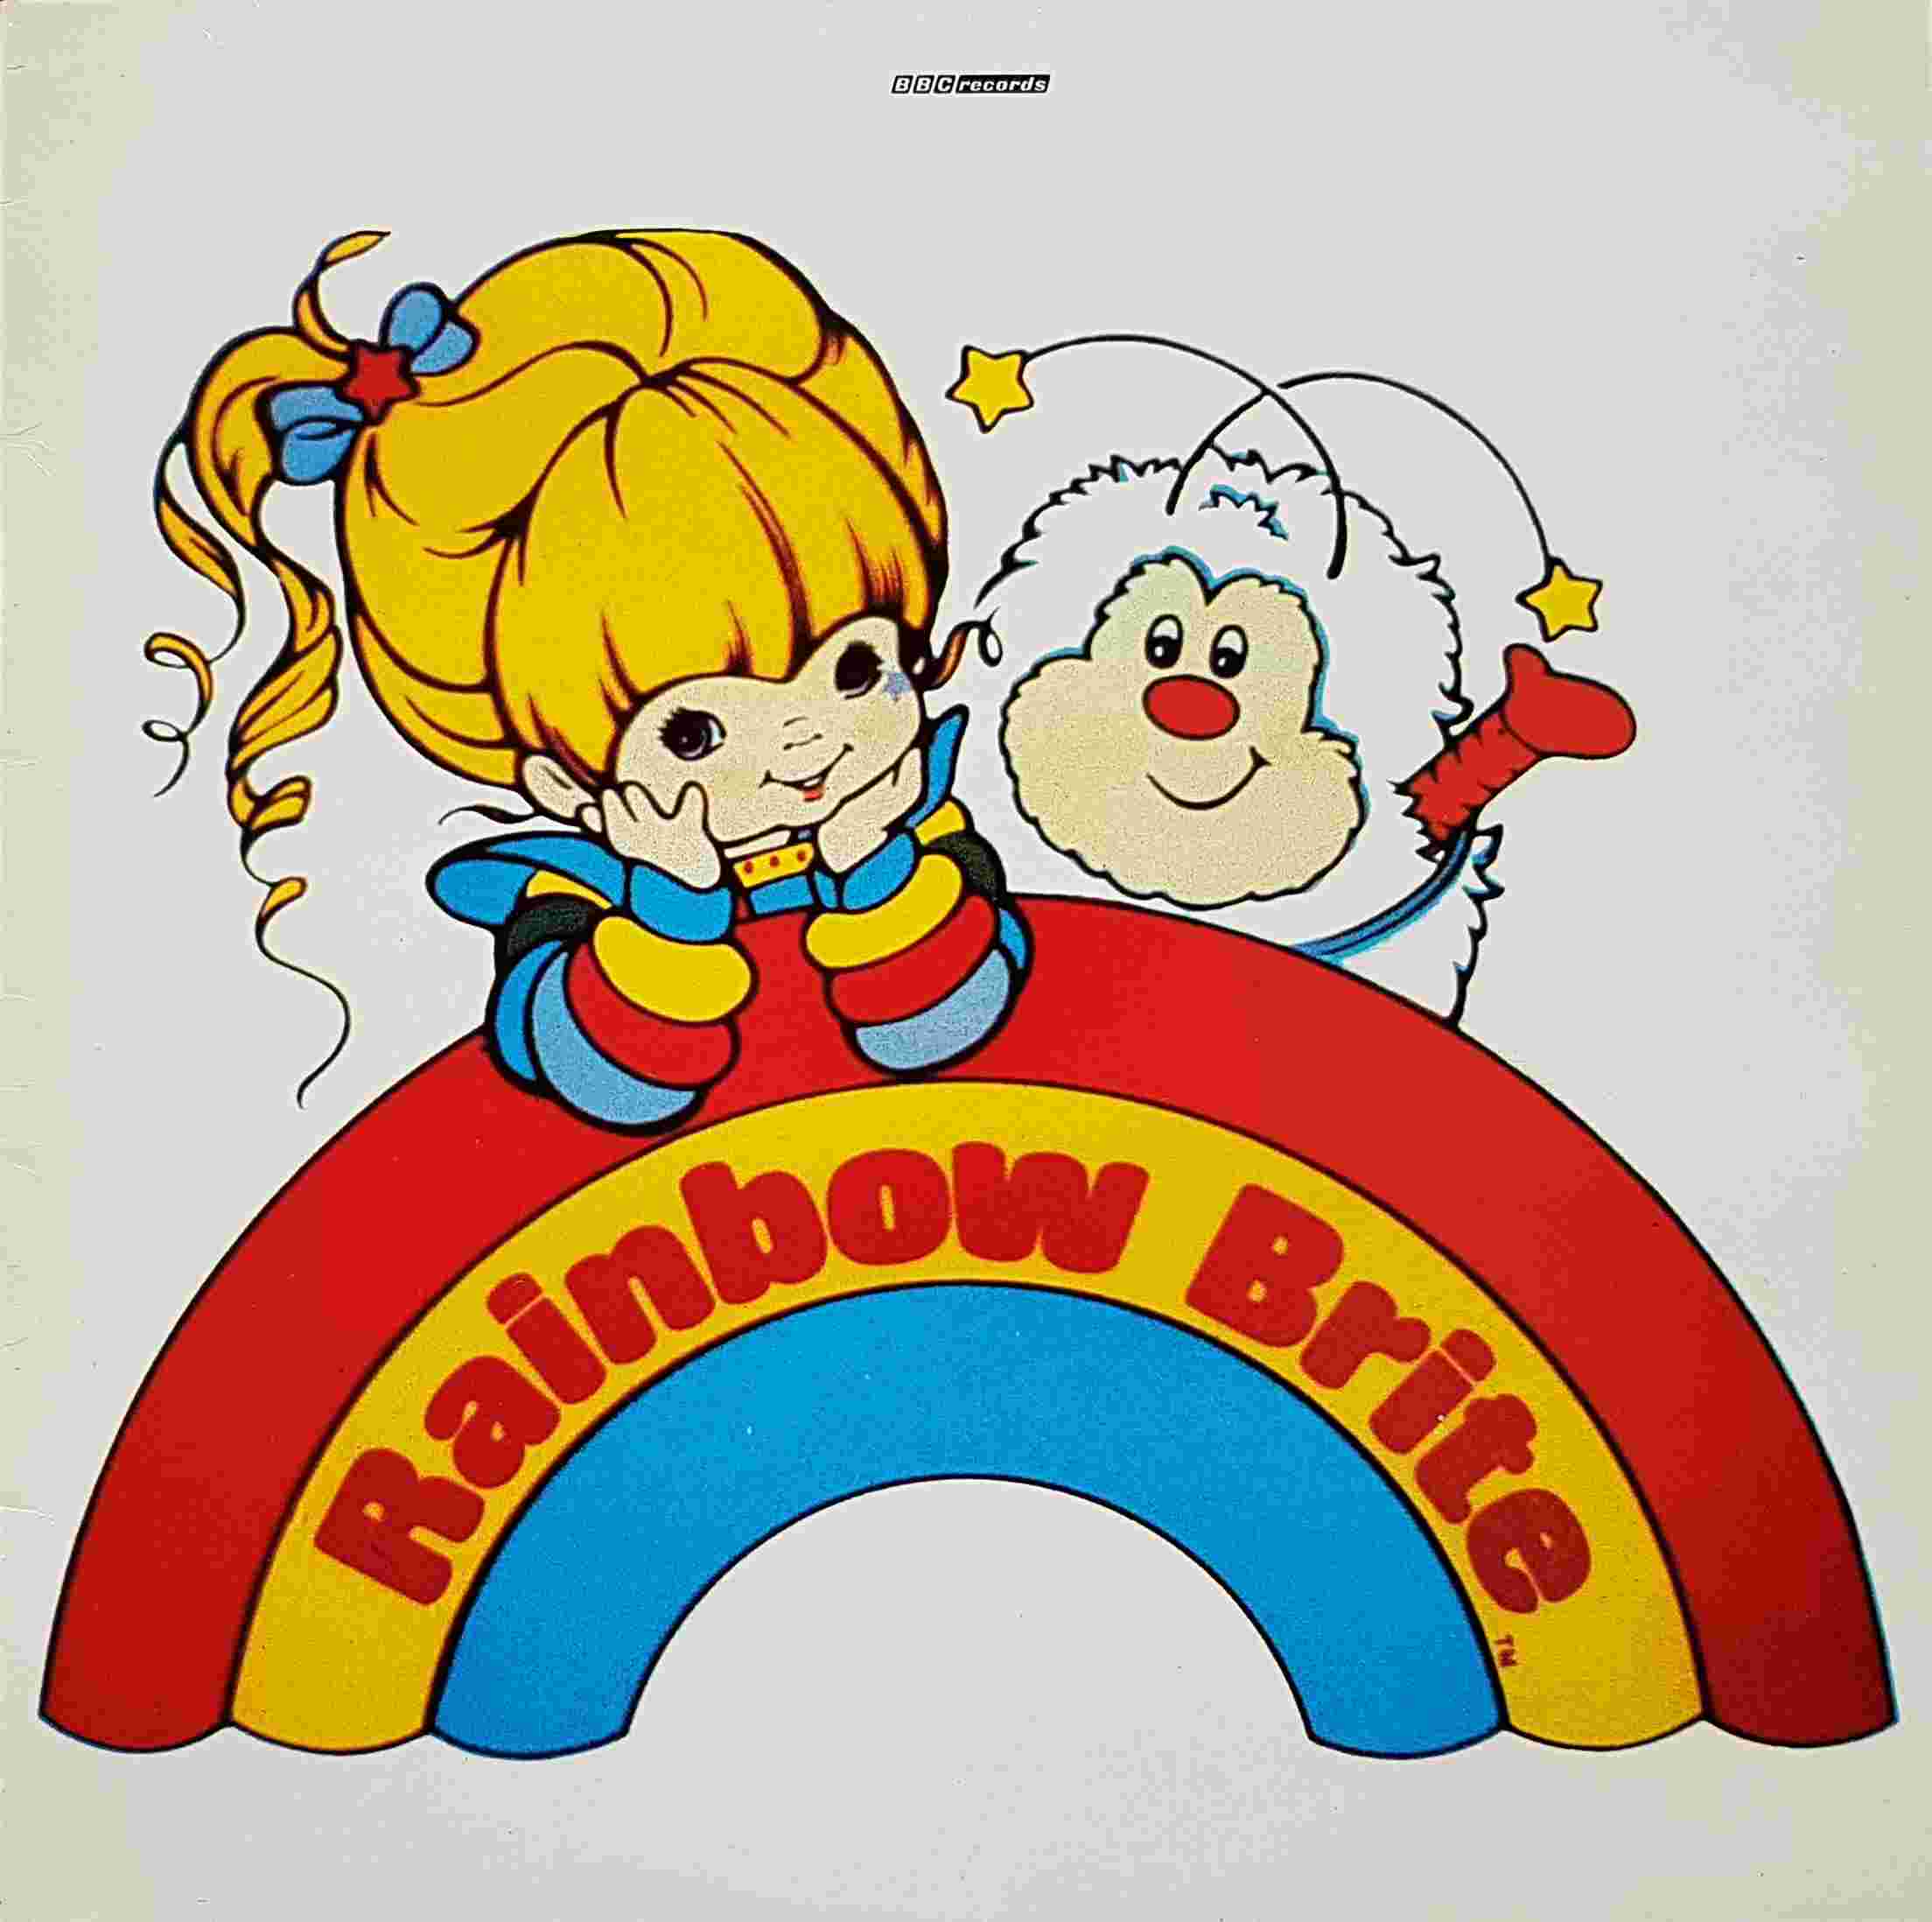 Picture of REC 566 Rainbow bright by artist Philip Evans from the BBC albums - Records and Tapes library